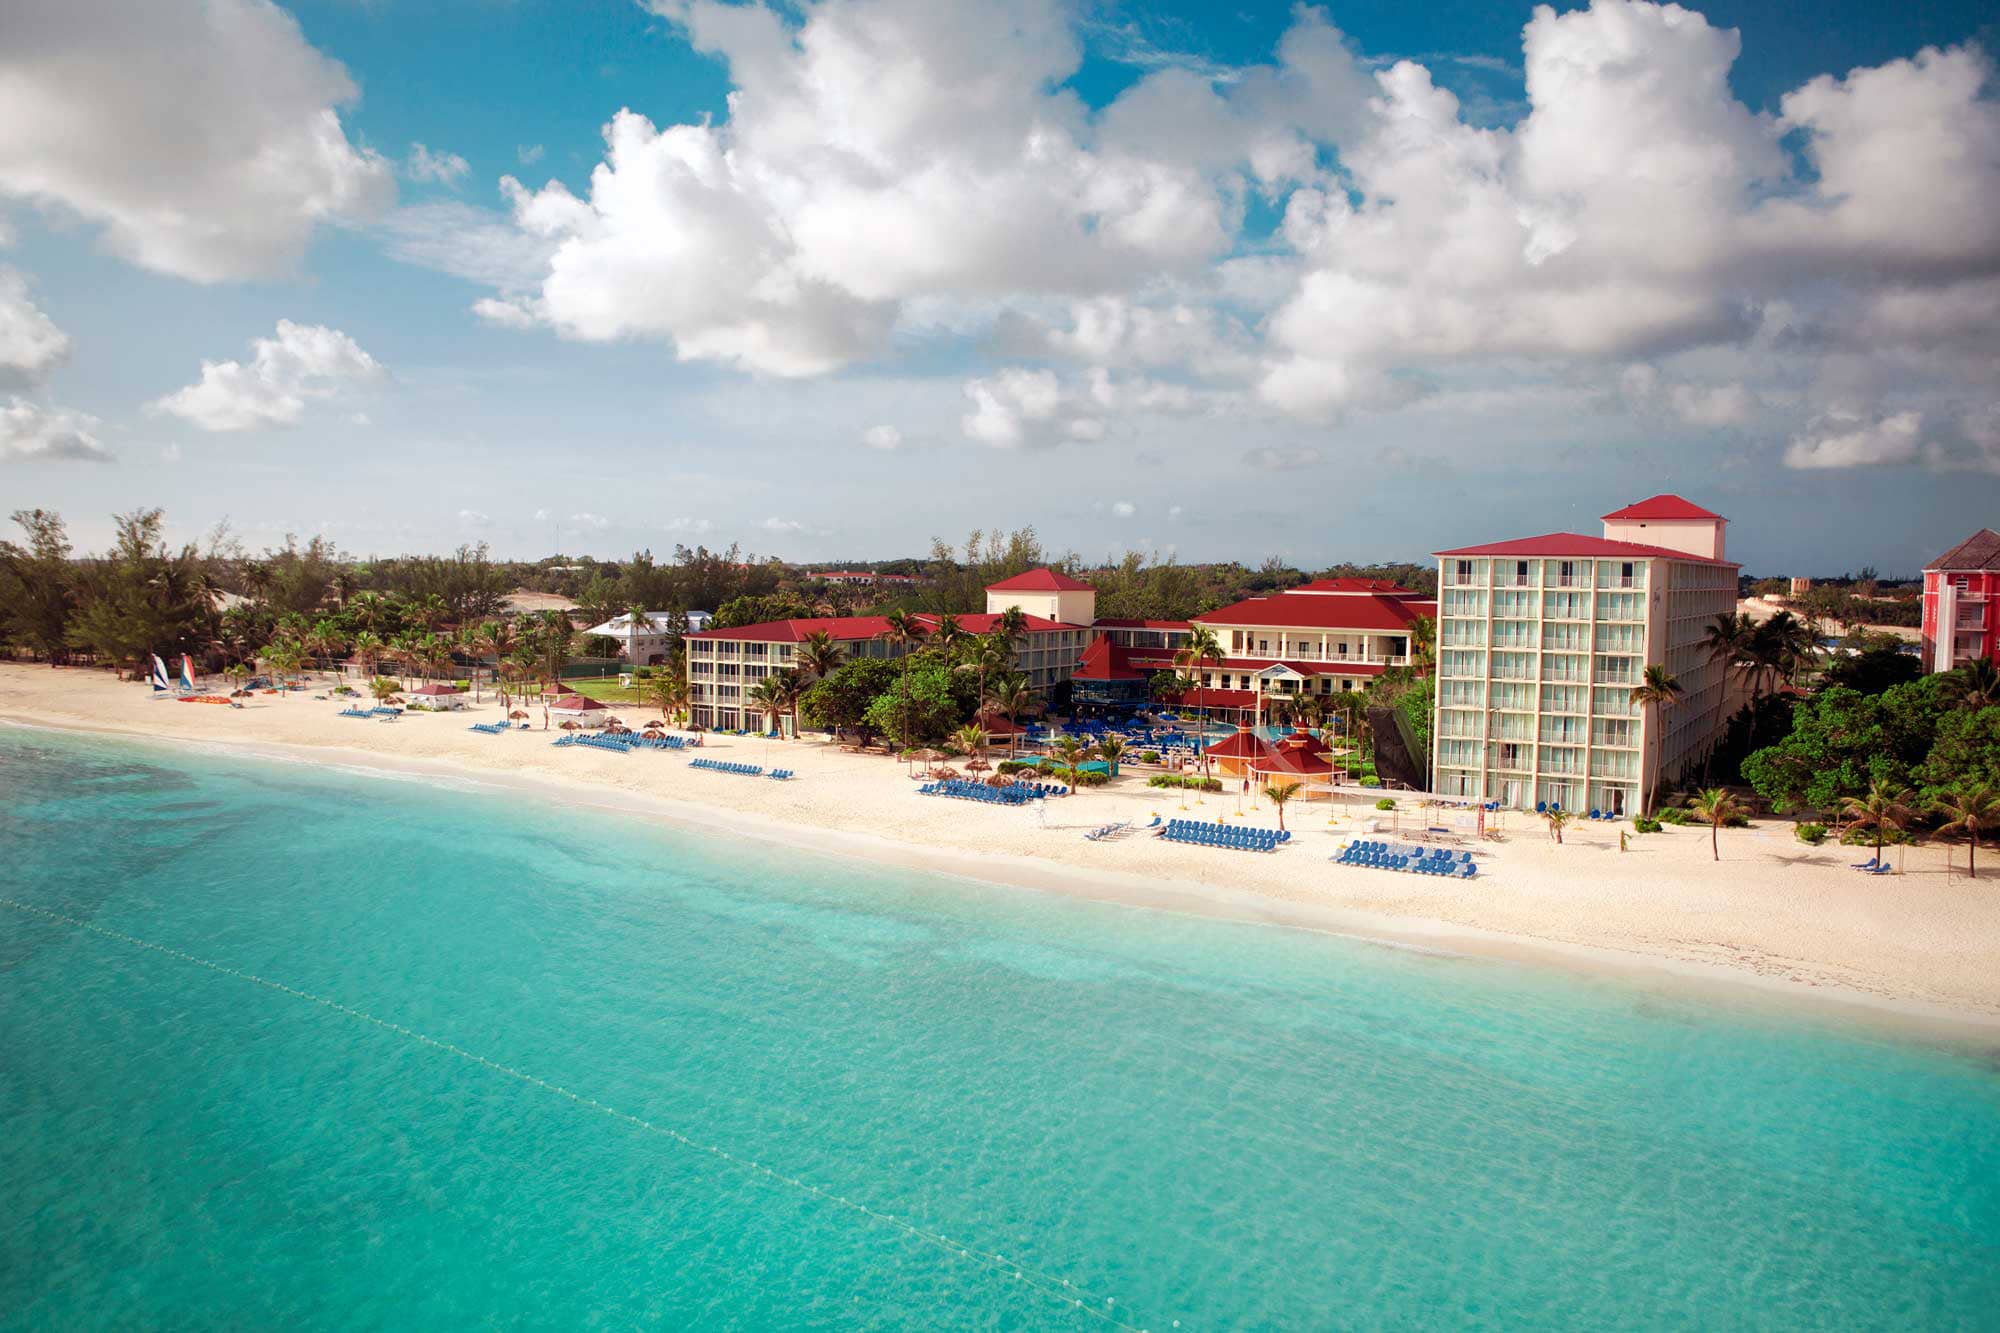 All Inclusive Cheap Honeymoon Deals and Packages: Breezes Bahamas Resort and Spa